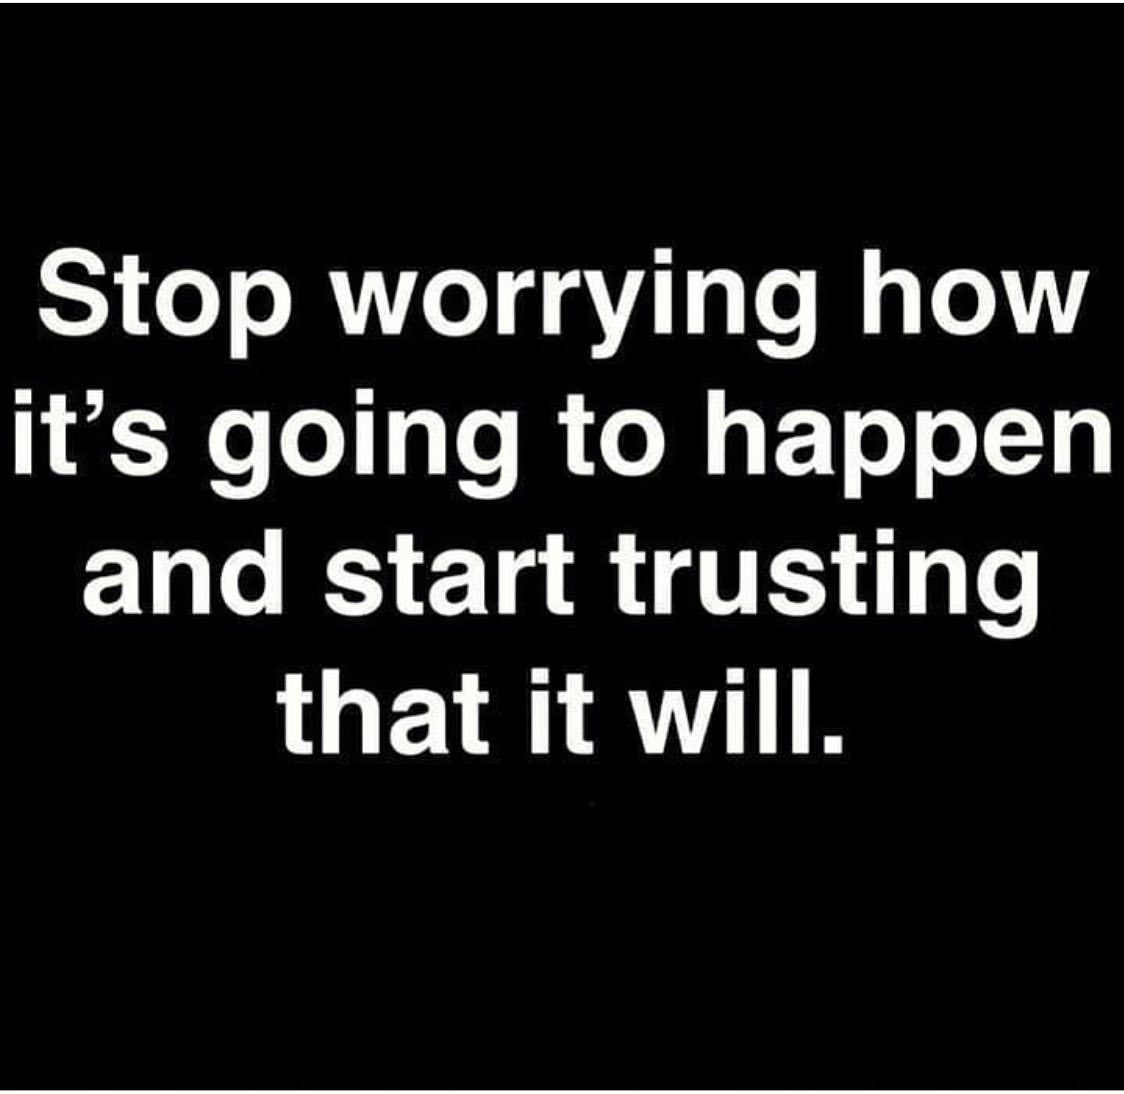 Stop worrying how it's going to happen and start trusting that it will.